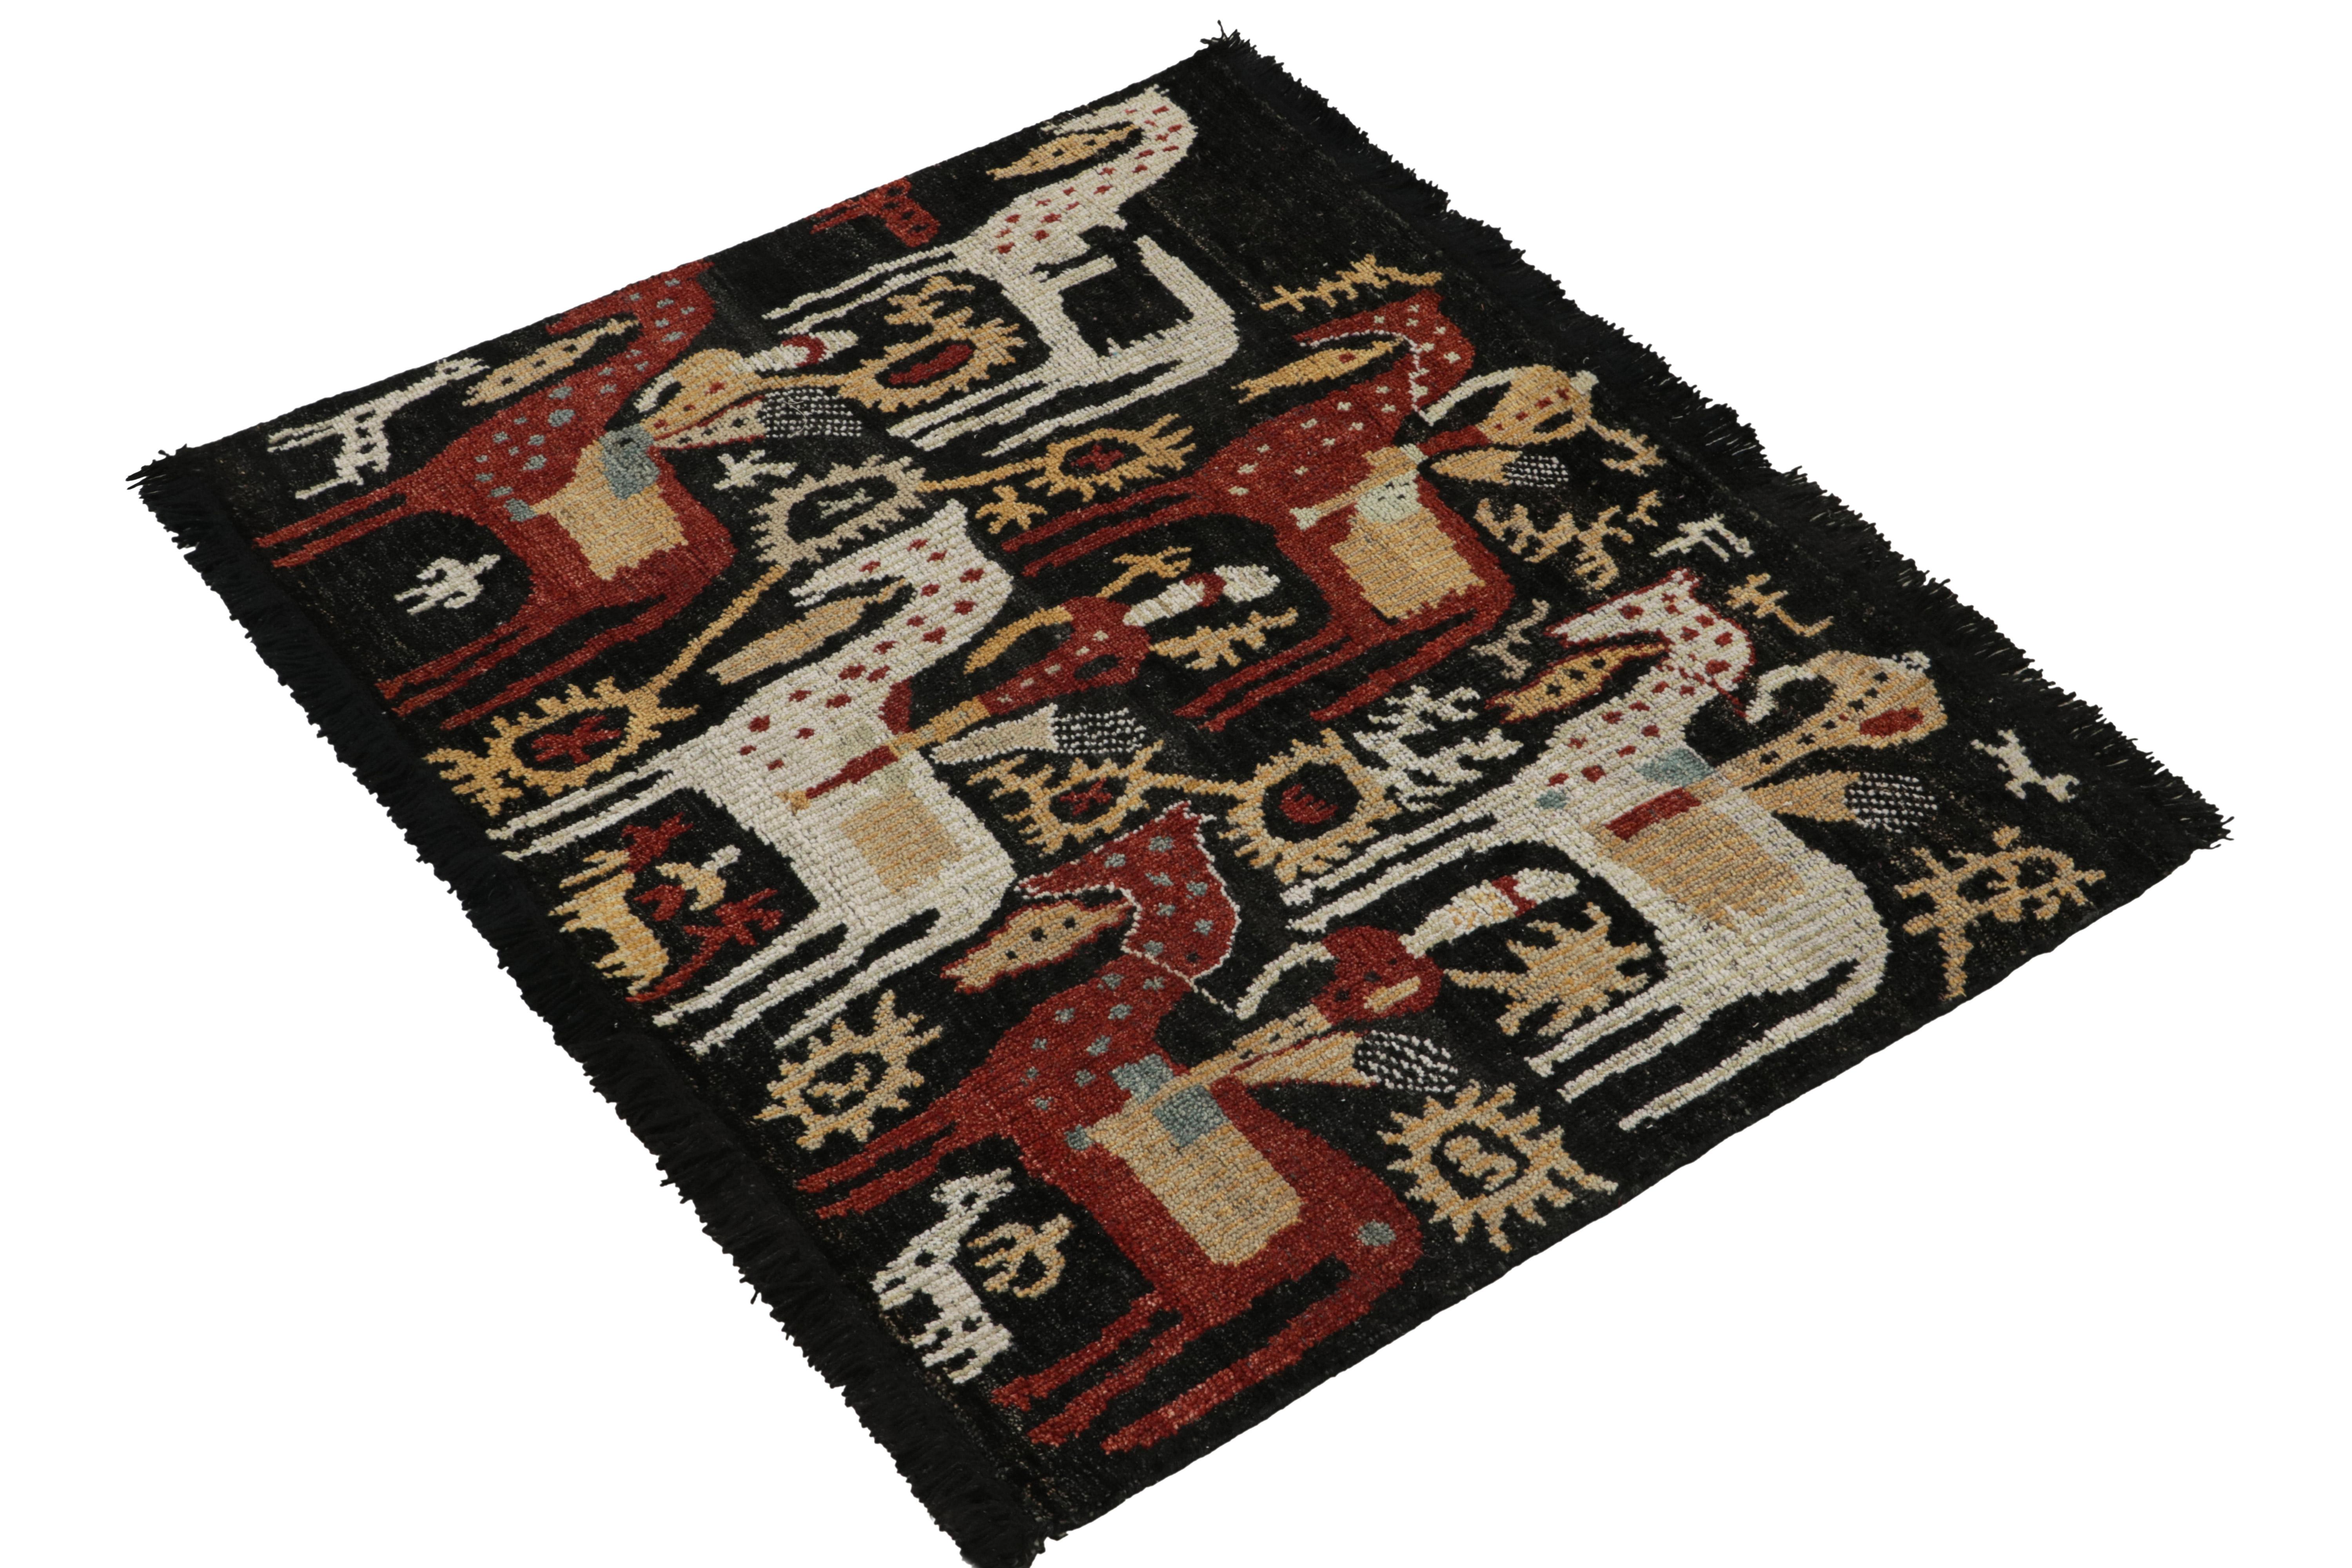 Indian Rug & Kilim's Tribal Style Rug in Black, Red and White Pictorial Pattern For Sale